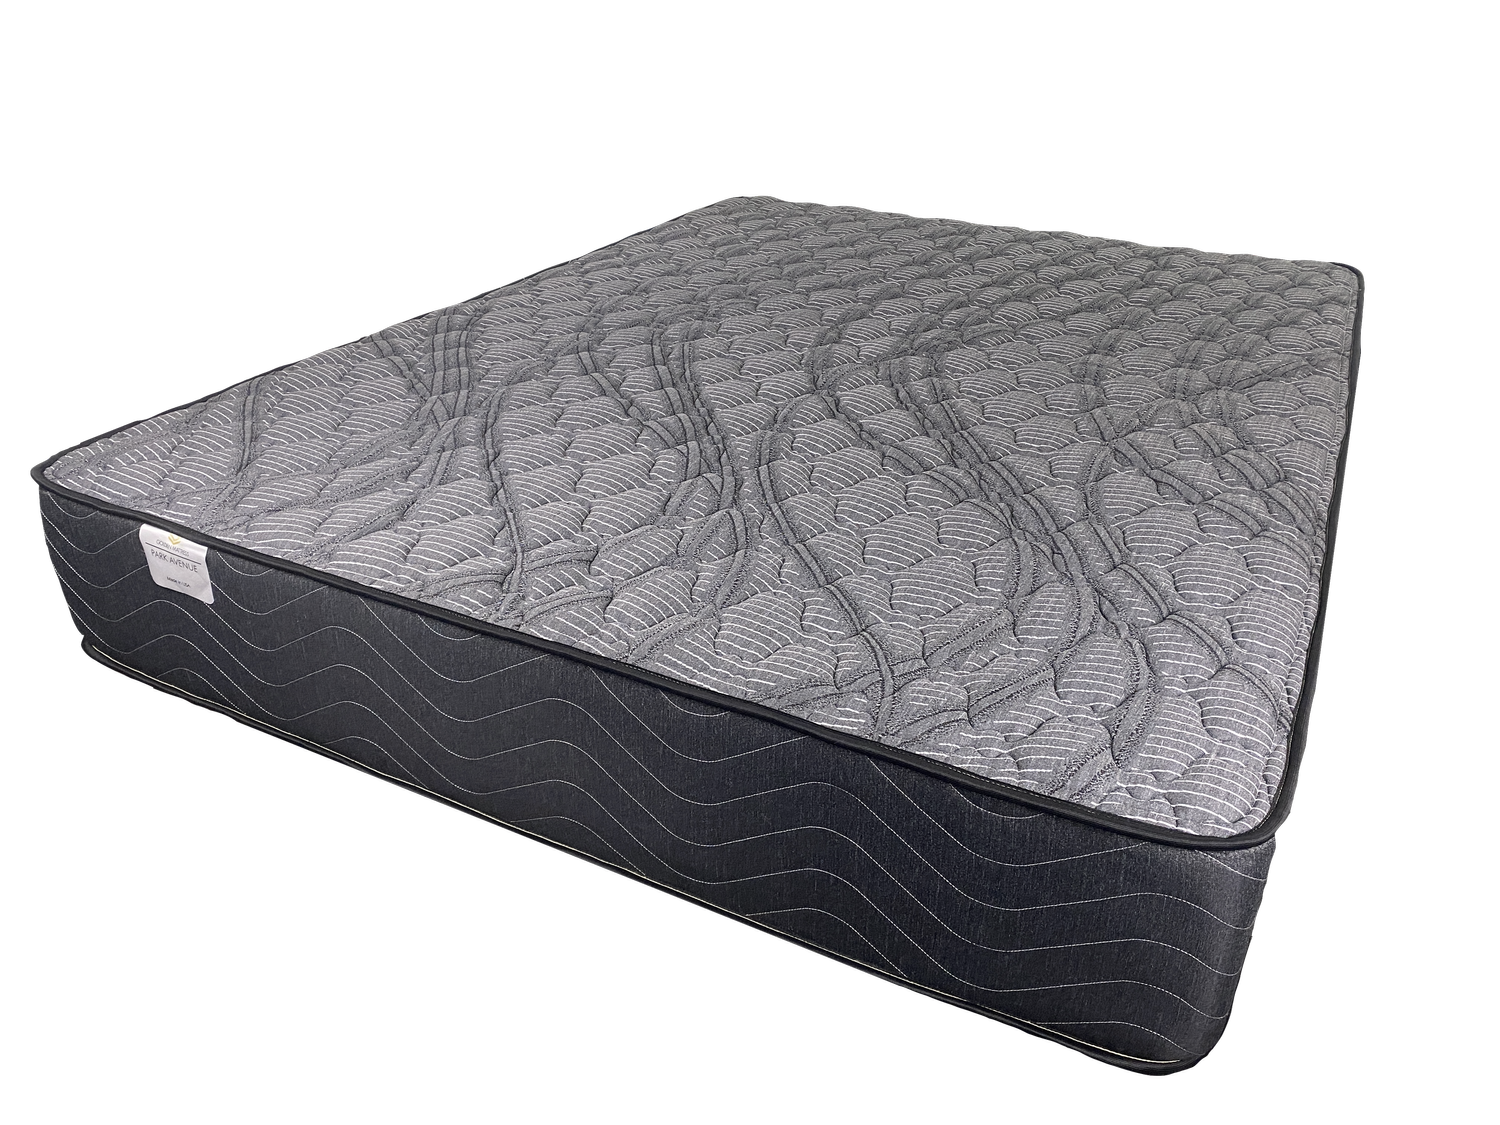 Park Avenue 1 Firm 12in double-sided/flippable Mattress